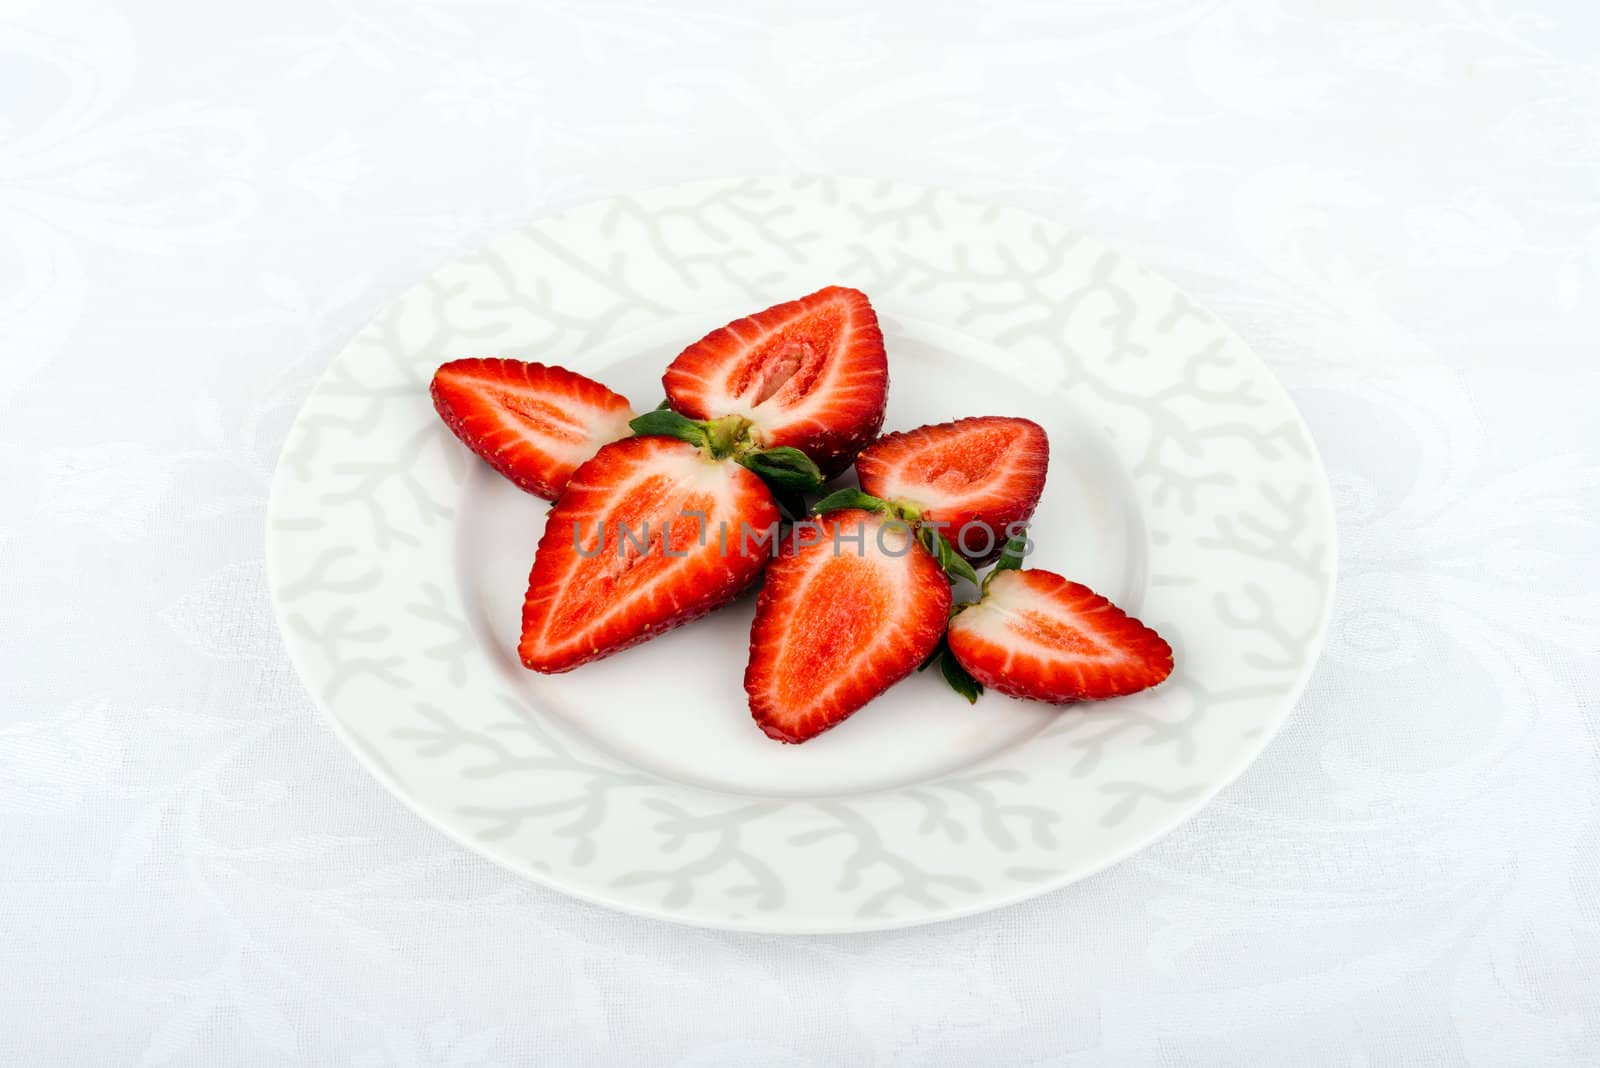 Some fresh strawberries on the plate.